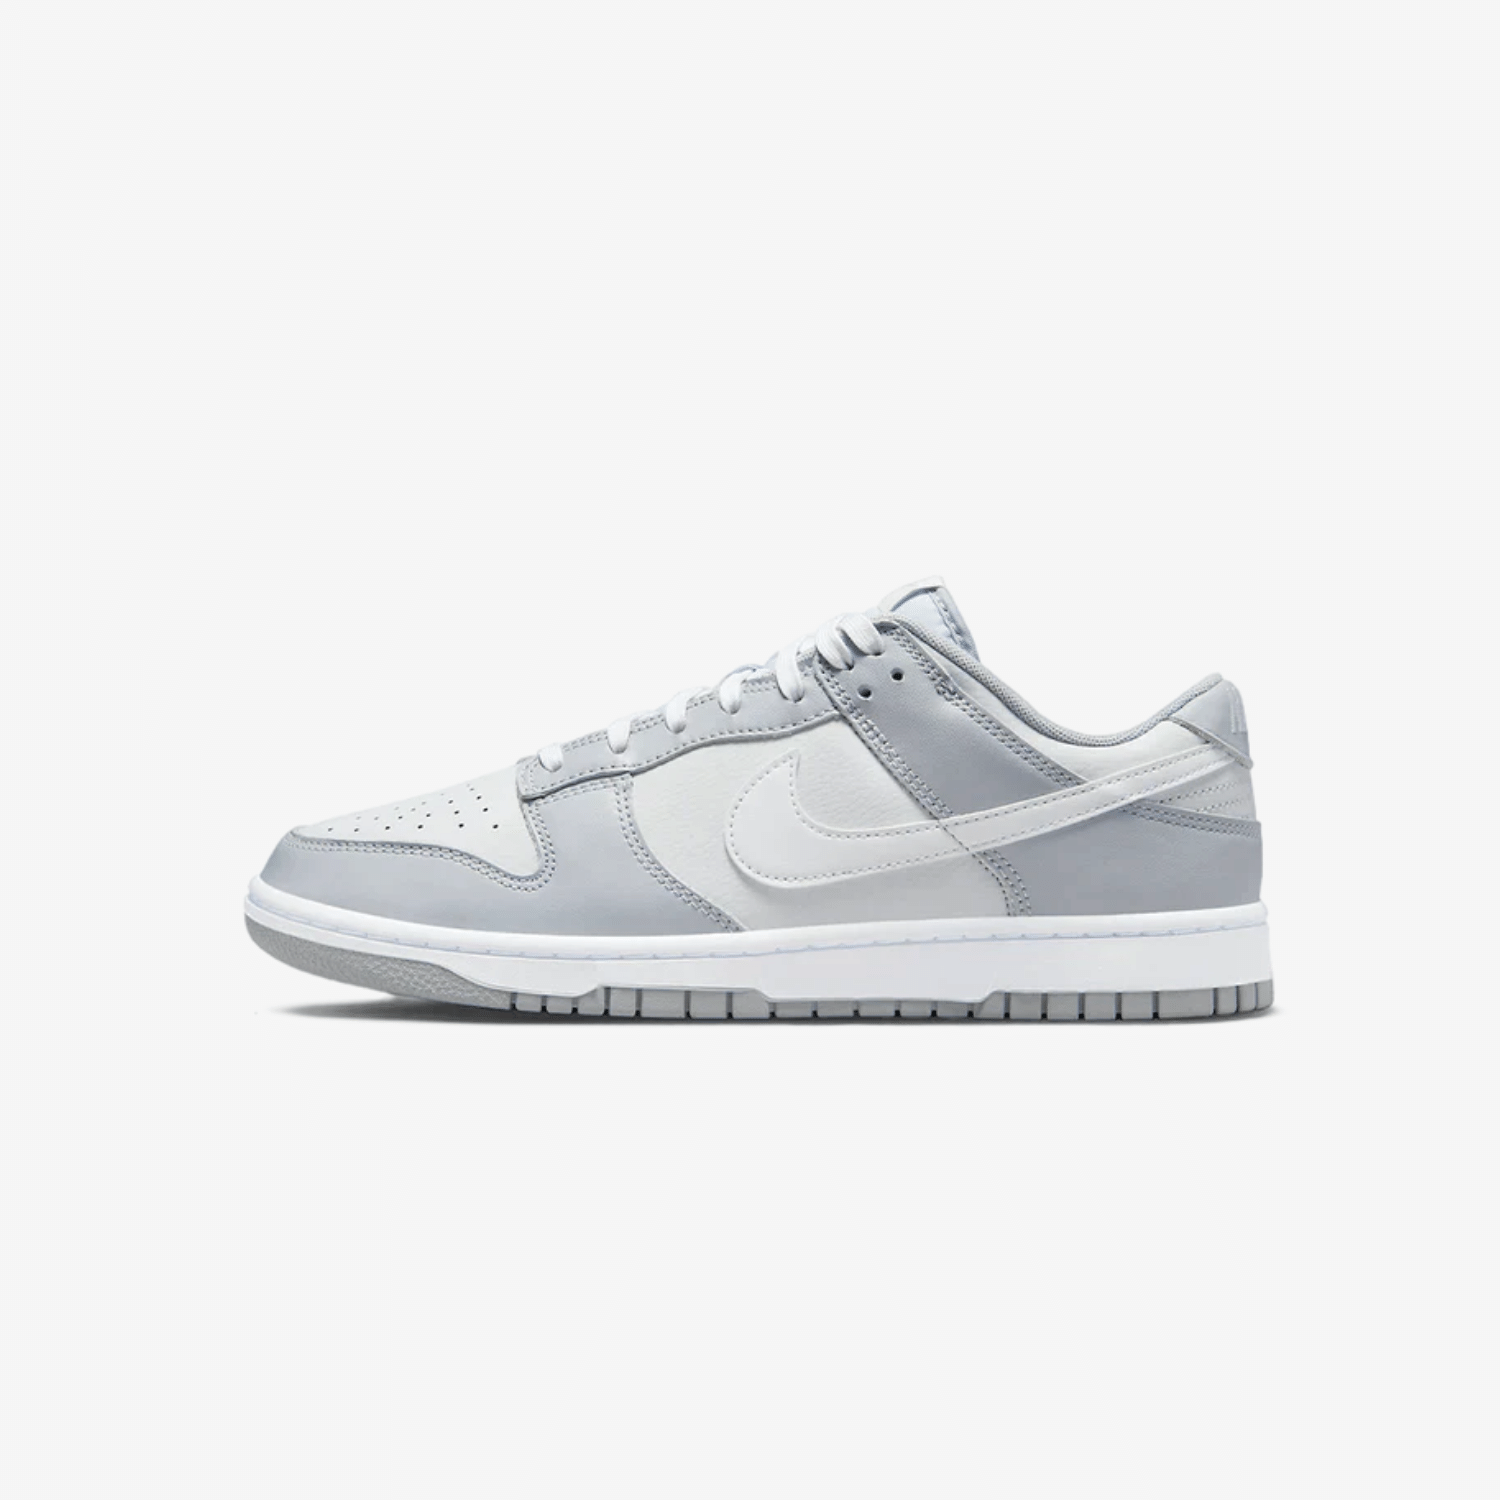       nike-dunk-low-two-tone-grey-DH9765-001-unfazed-1